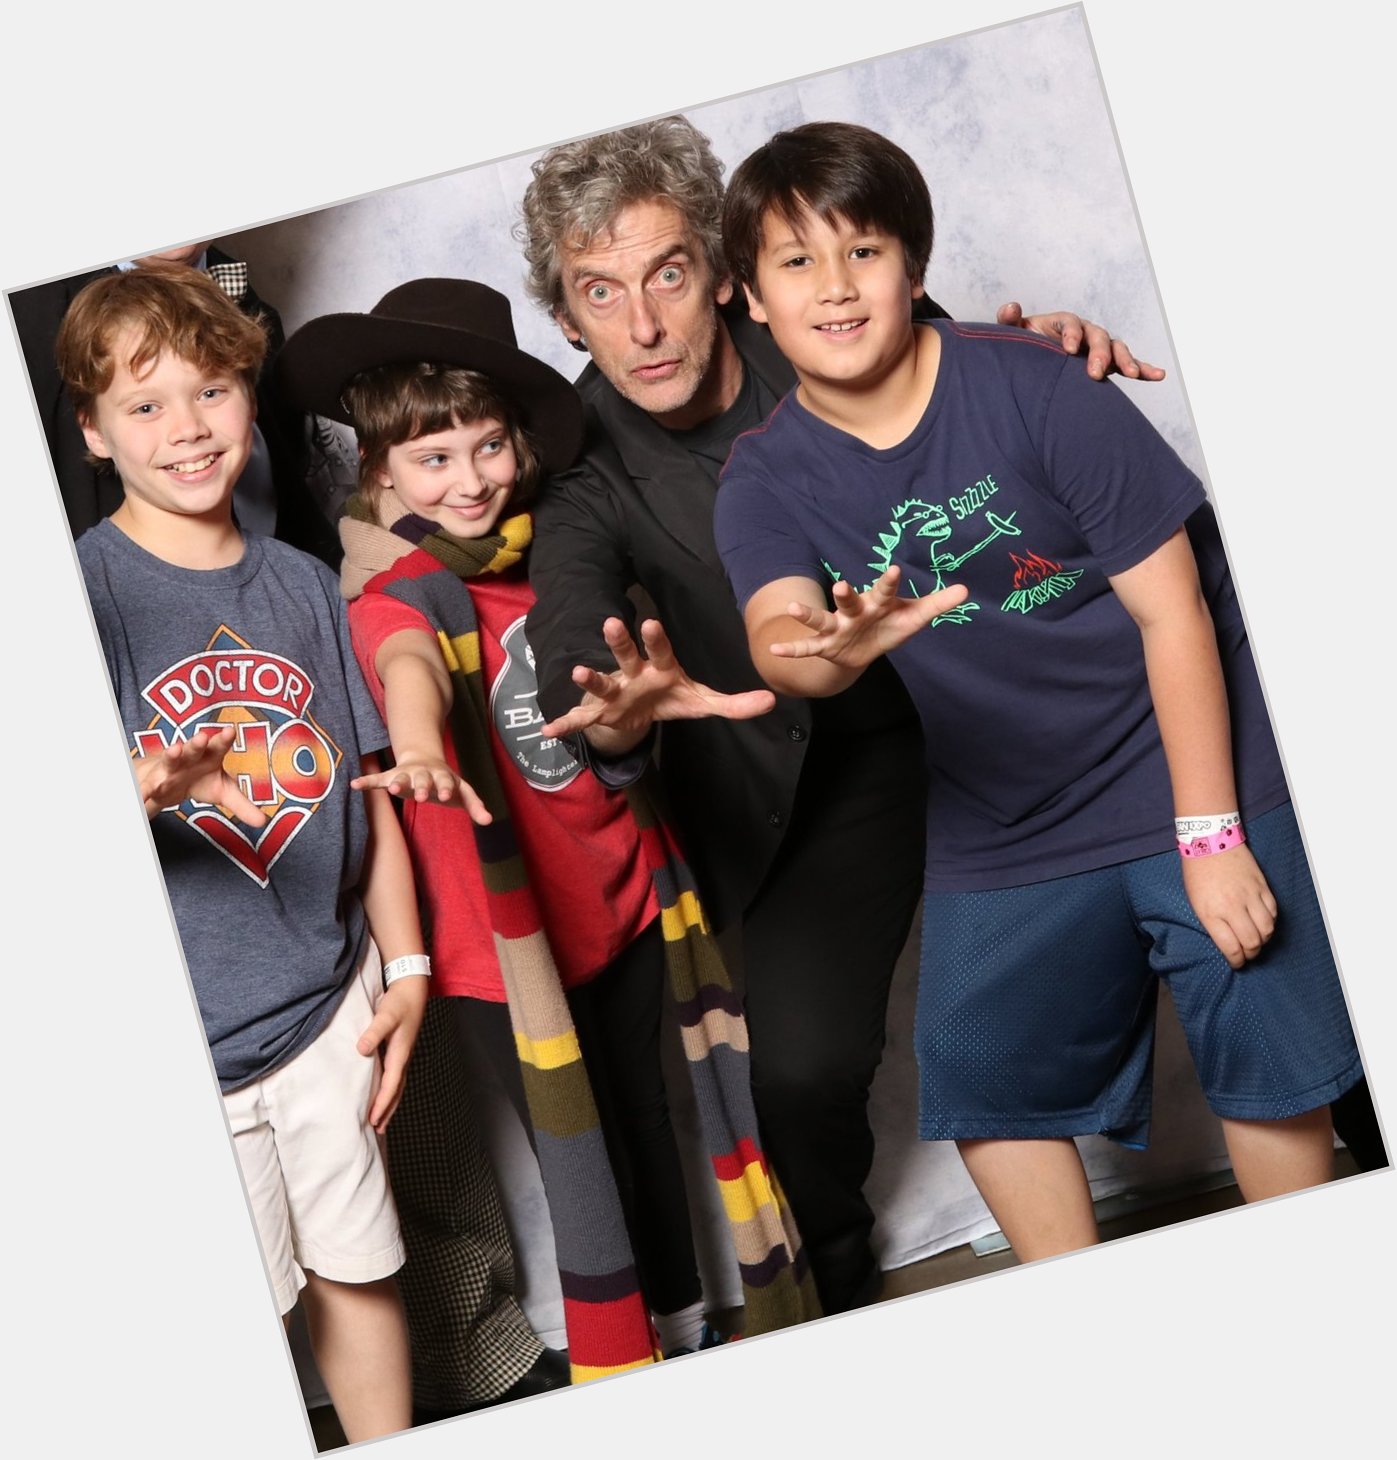 Happy Birthday Peter Capaldi (seen here at with 3 of the original 6 Who Kids)! 